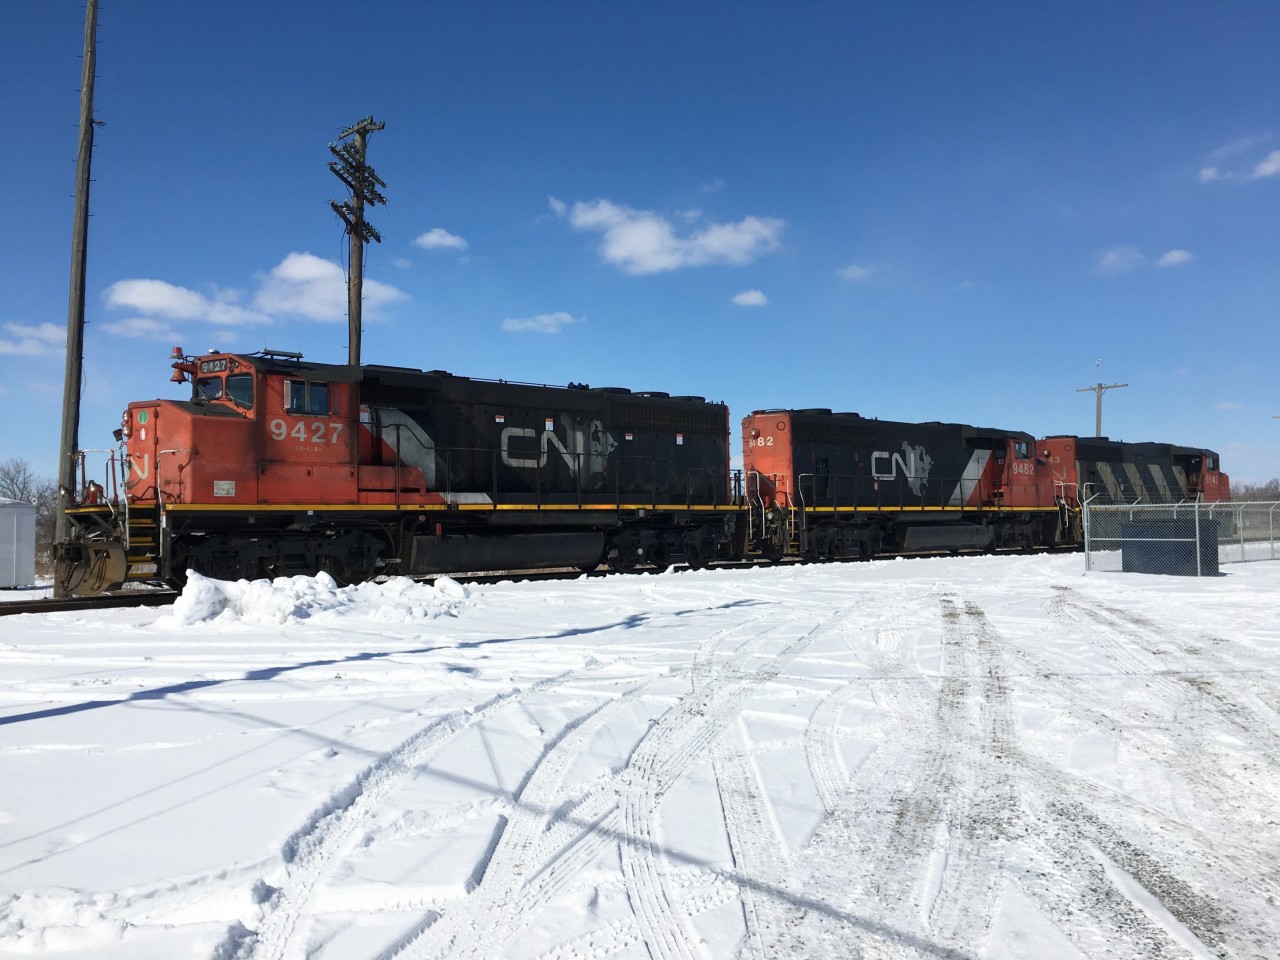 It's lunchtime at Hagersville as a trio of CN locomotives sit idling near the new Operations trailers. A pair of North American maps and a line of zebra stripes on this power splits the snow covered ground and the clear blue sky nicely on this cold, clear day.